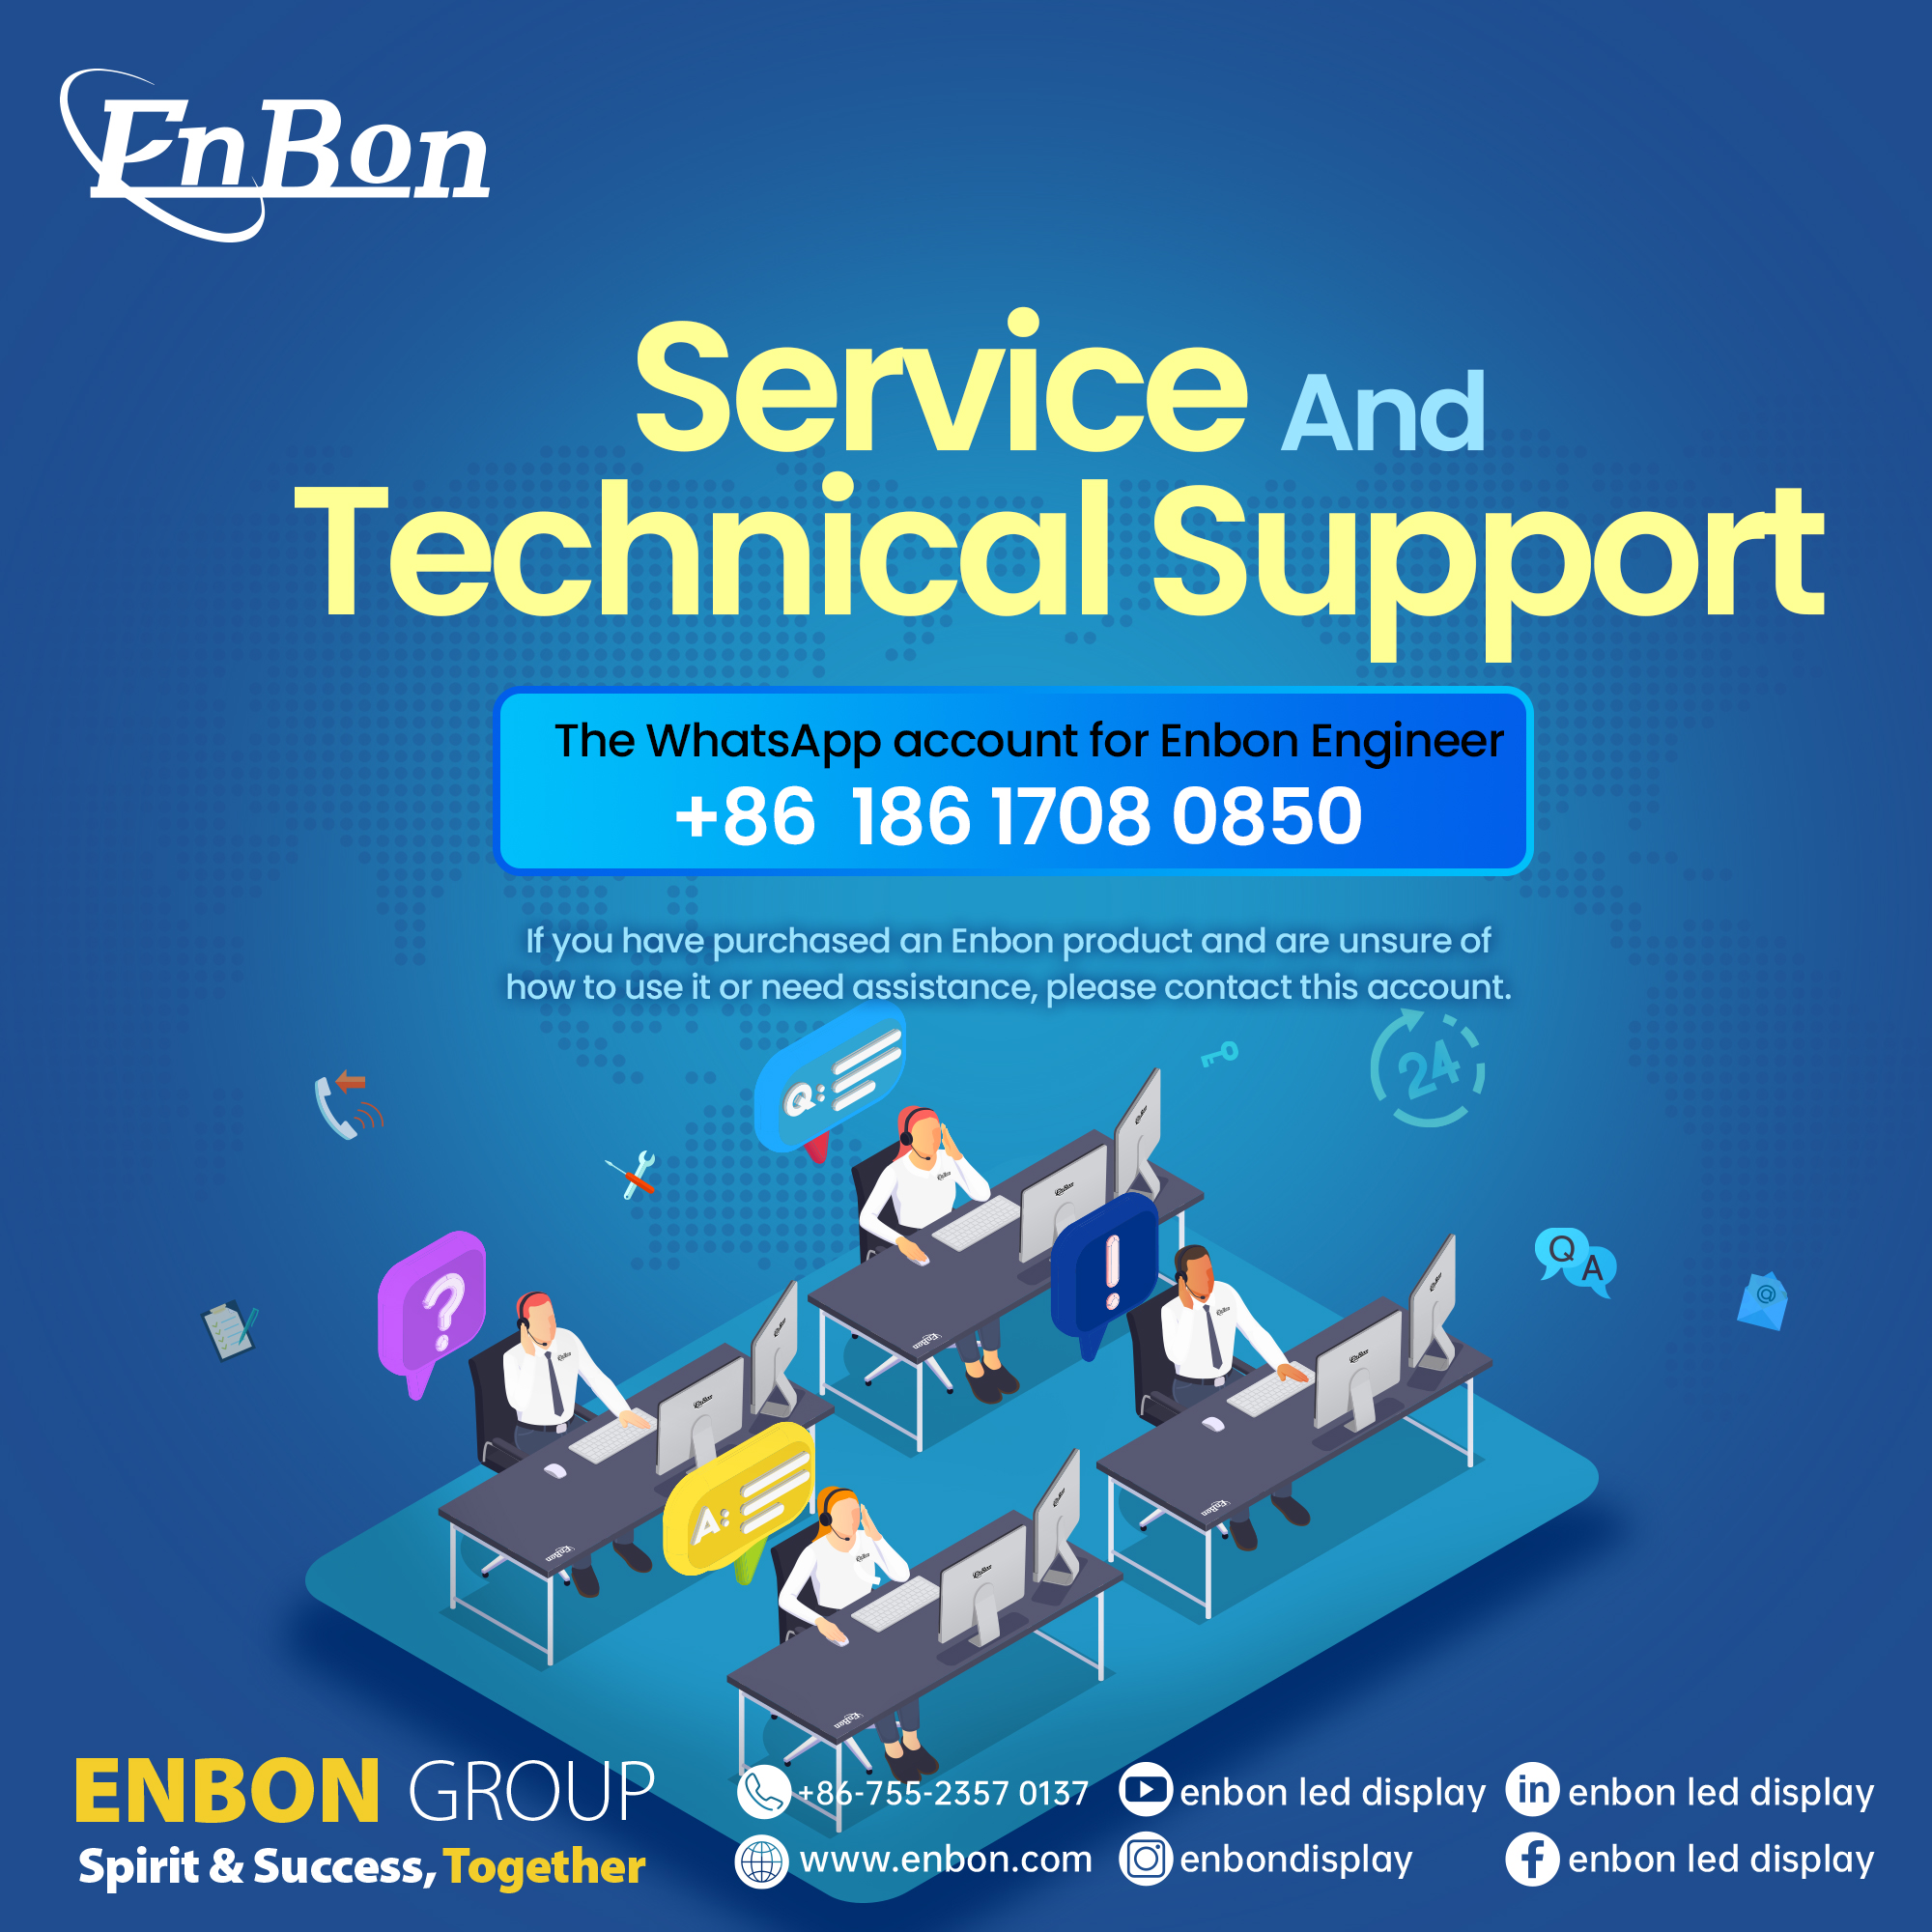 Enbon After-Sales Technical Support - Professional Services, Worry-Free Guarantee"